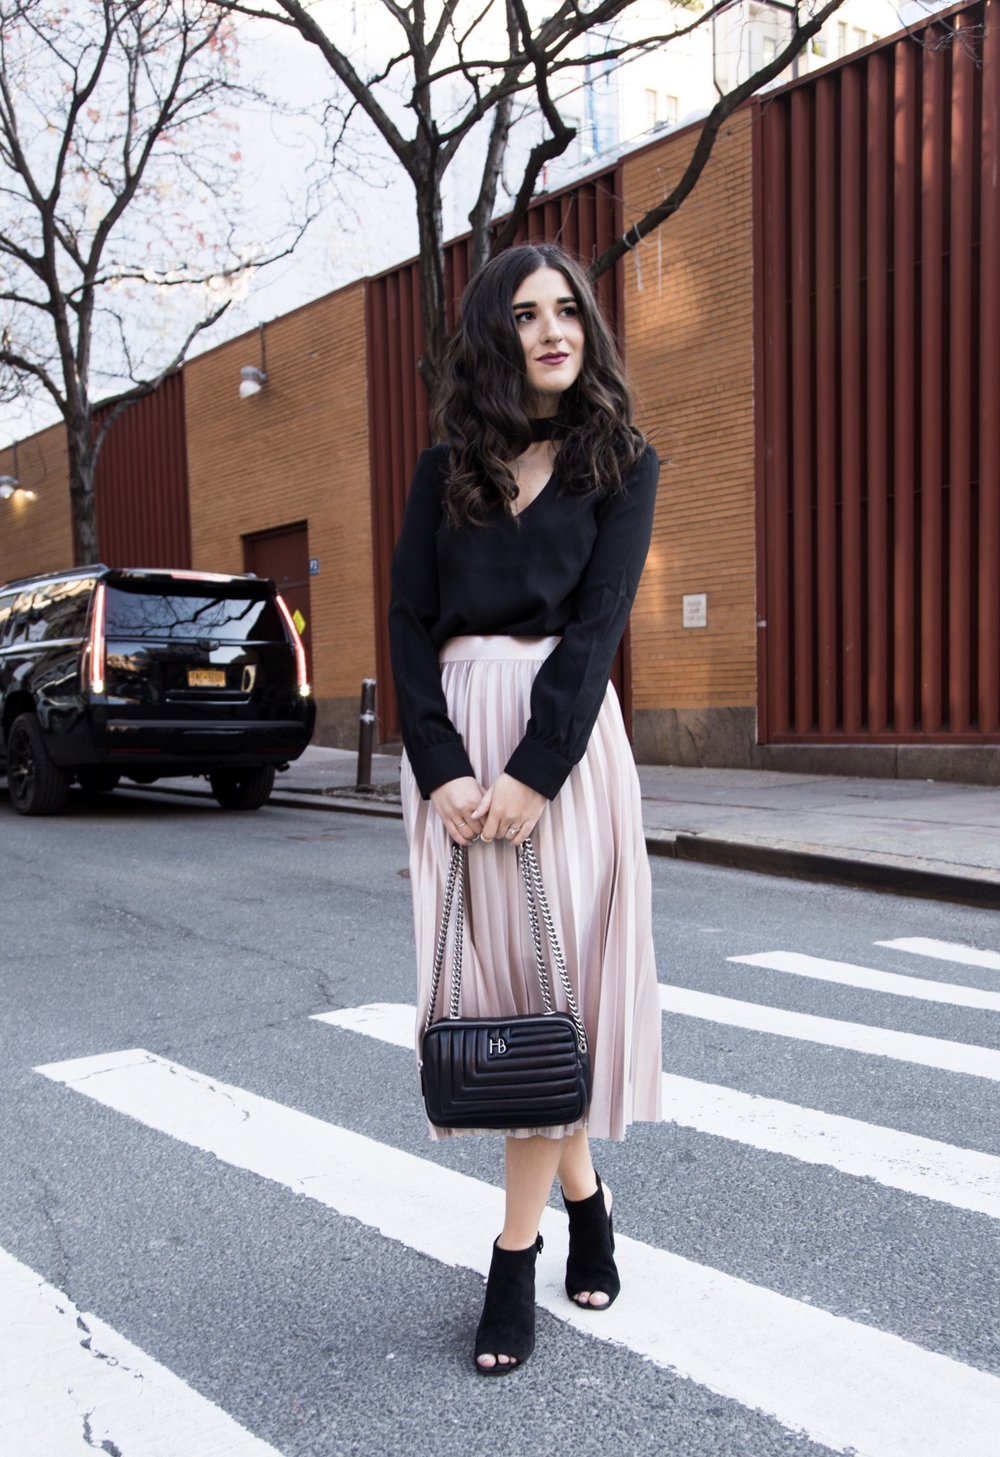 Metallic Midi Skirt + Black Cutout Top // How I Pack In Just A Carry On